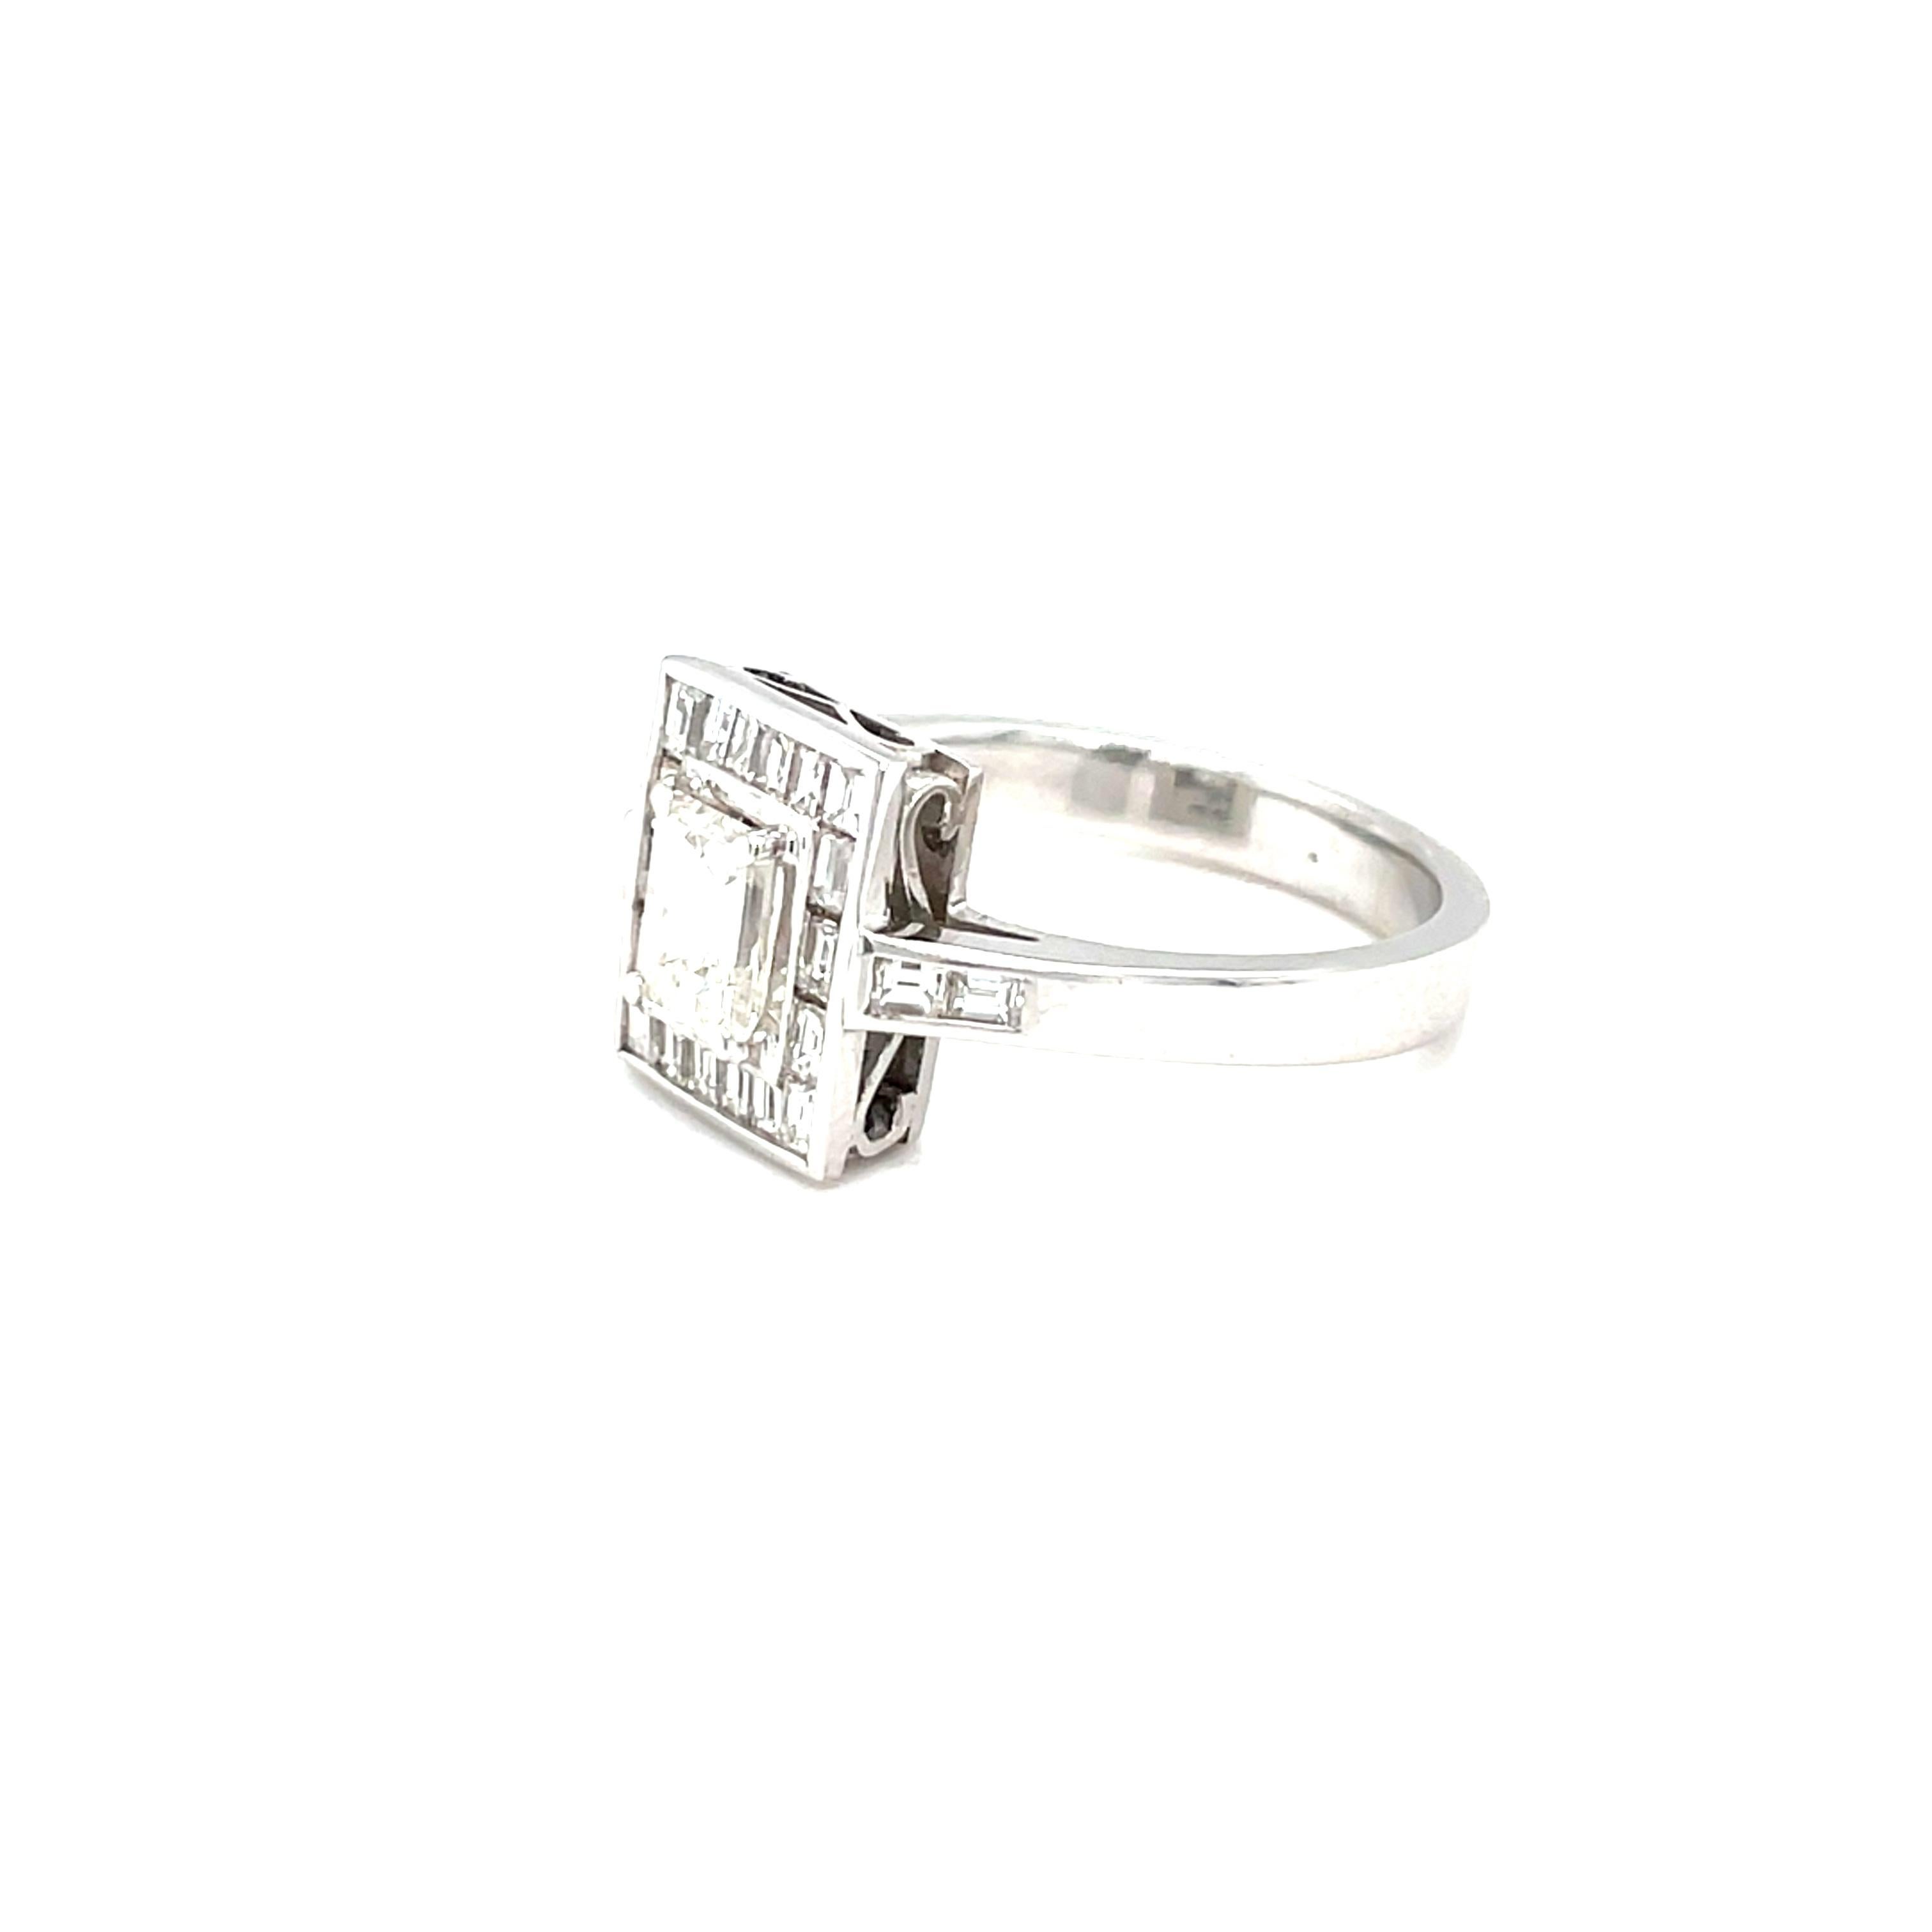 18K white gold engagement ring is from Damier Collection. This beautiful made of an emerald cut colorless diamond 0.65ct decorated by 18 diamonds and 4 diamonds on setting in total of 0.77ct. Stunning for any occasion!

Damier presents unique pieces